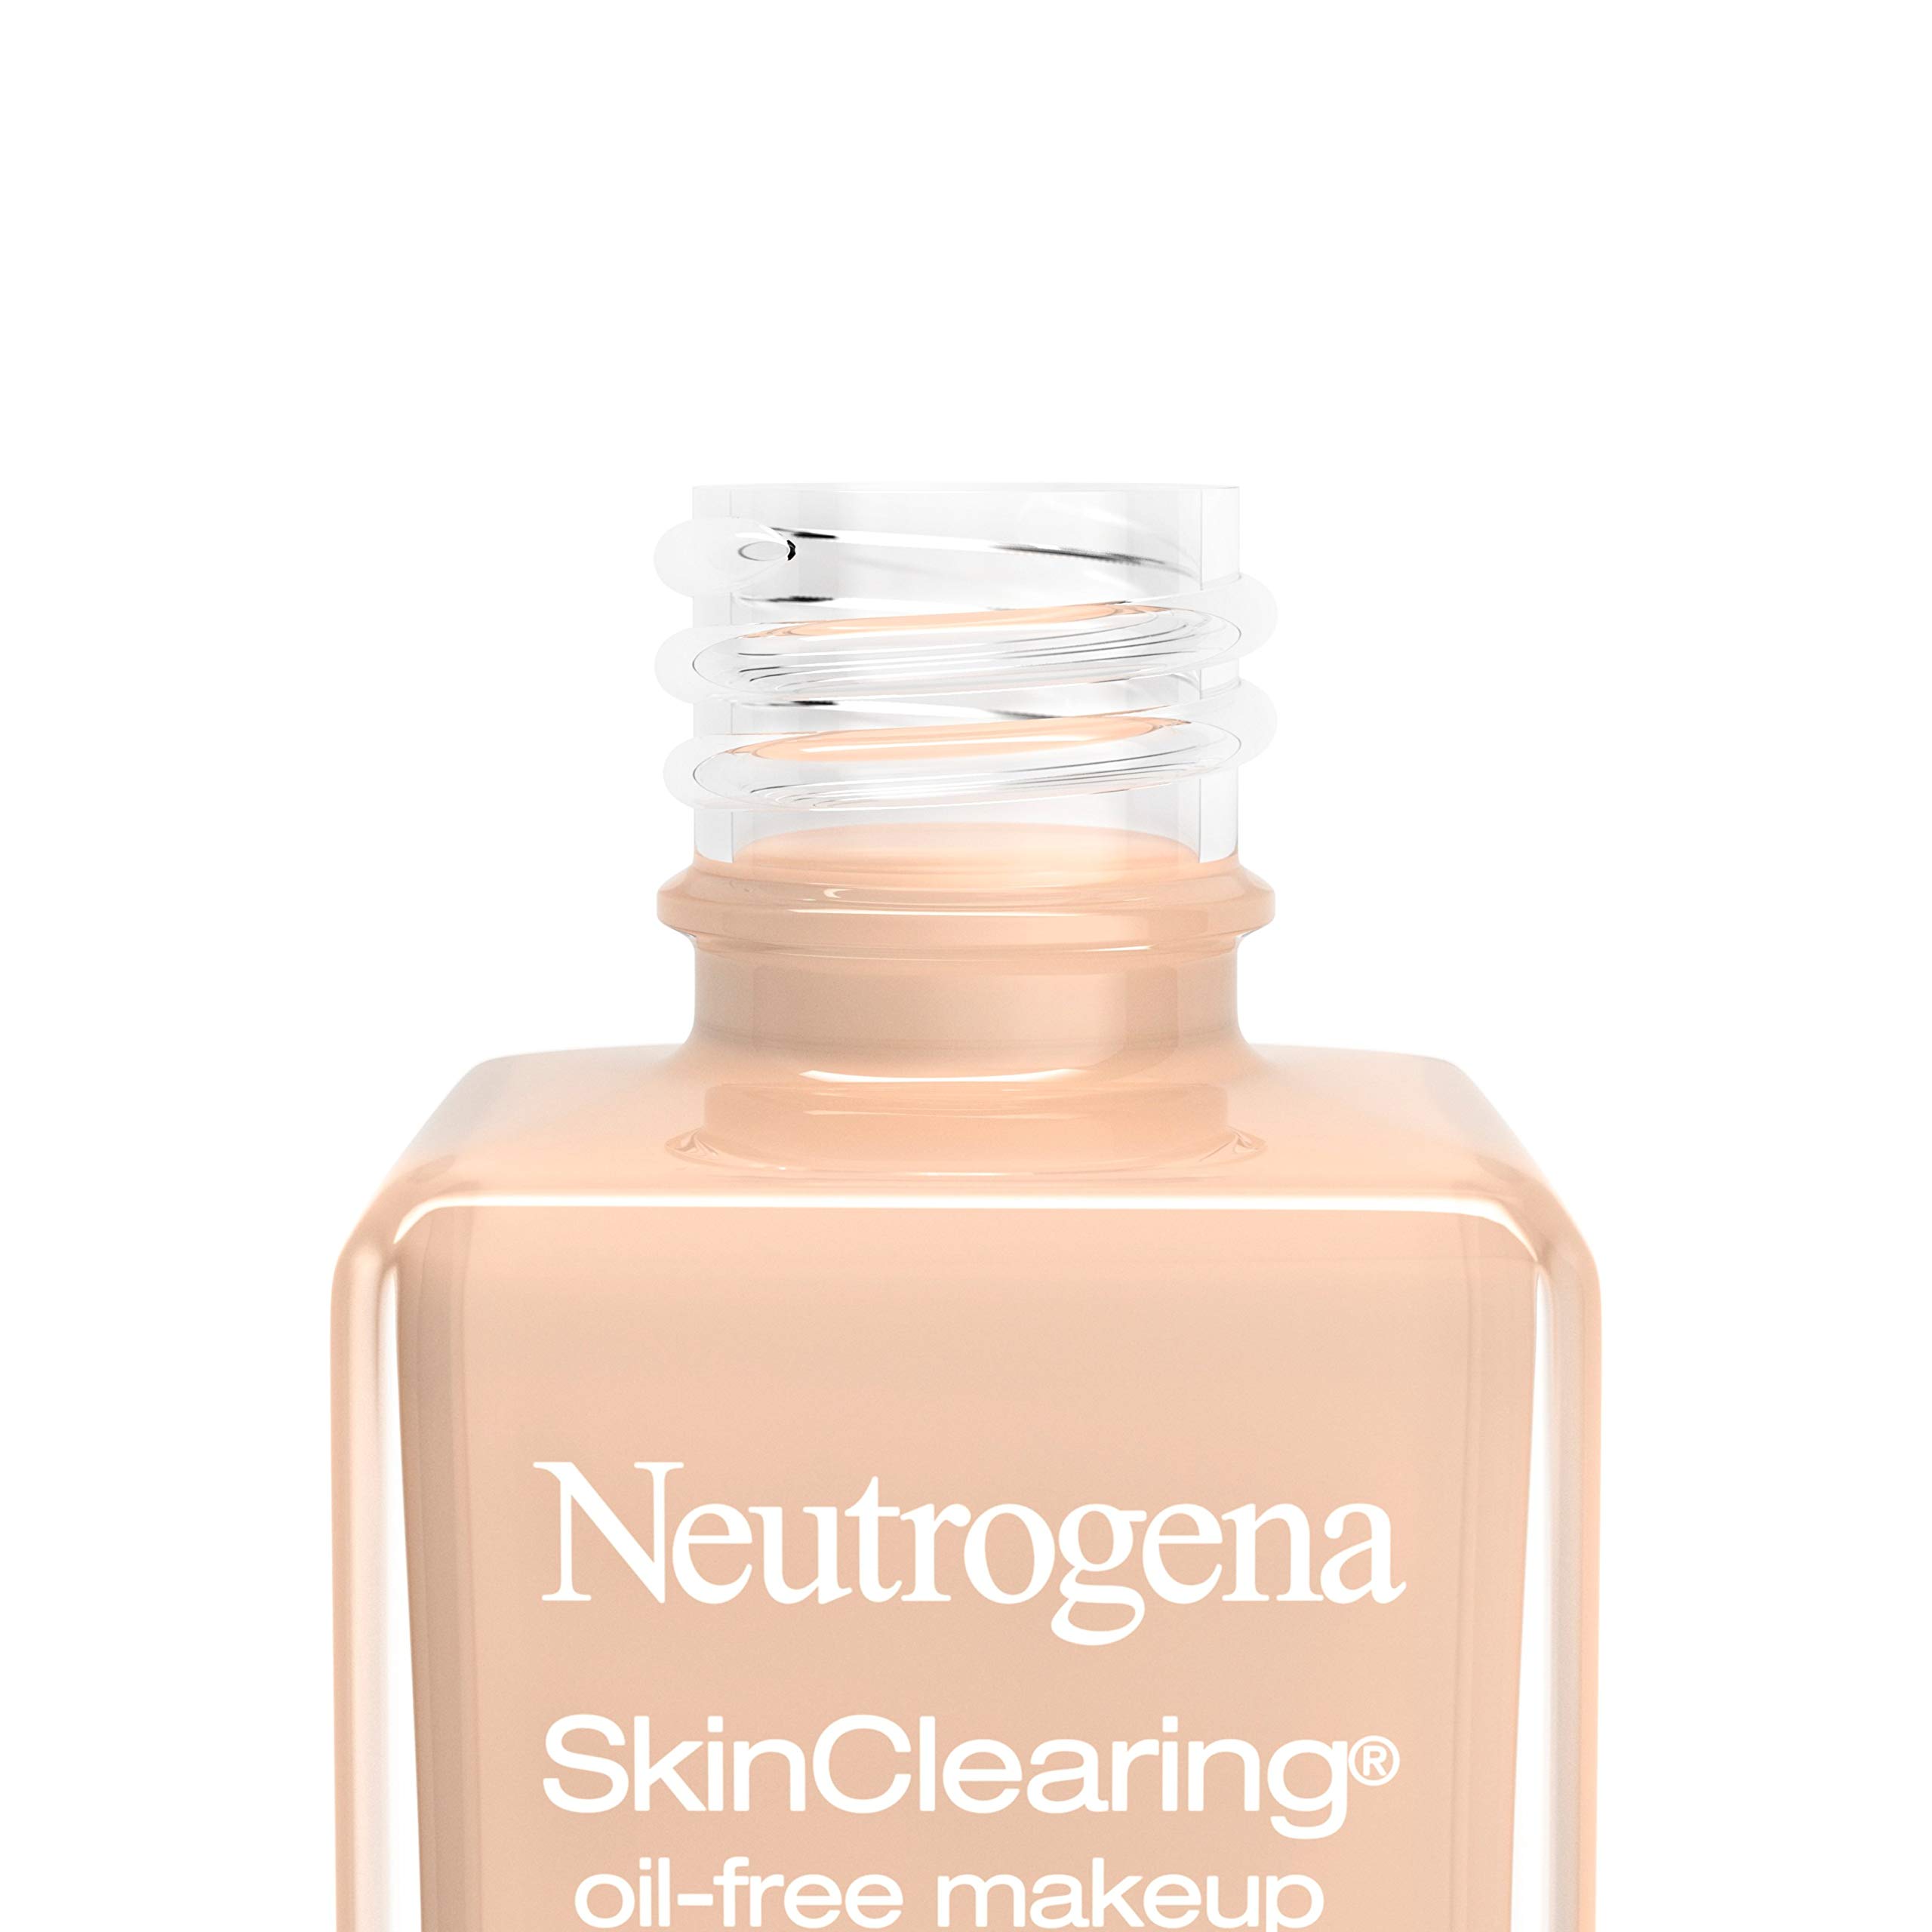 Neutrogena SkinClearing Oil-Free Acne and Blemish Fighting Liquid Foundation with.5% Salicylic Acid Acne Medicine, Shine Controlling Makeup for Acne Prone Skin, 40 Nude, 1 fl. oz